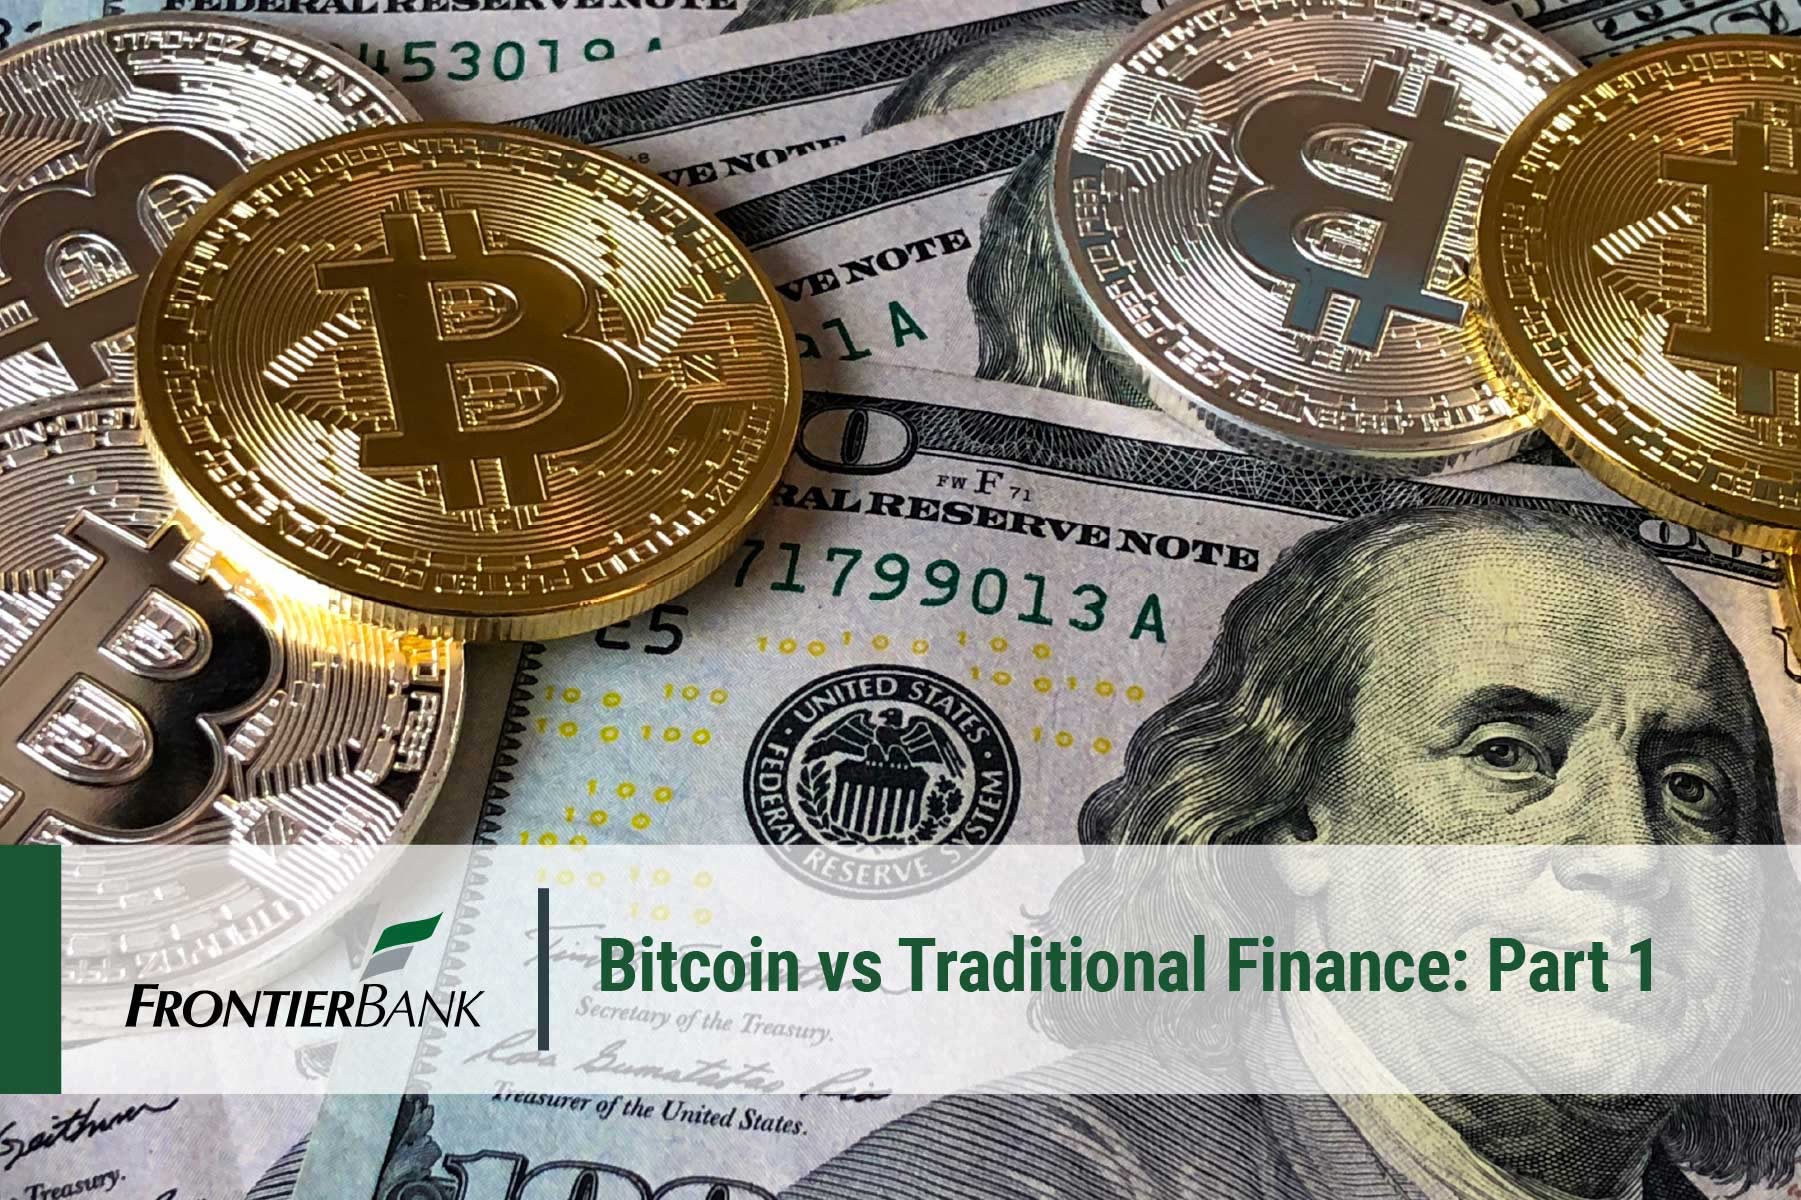 Bitcoin vs. Traditional Finance, Part 1 text